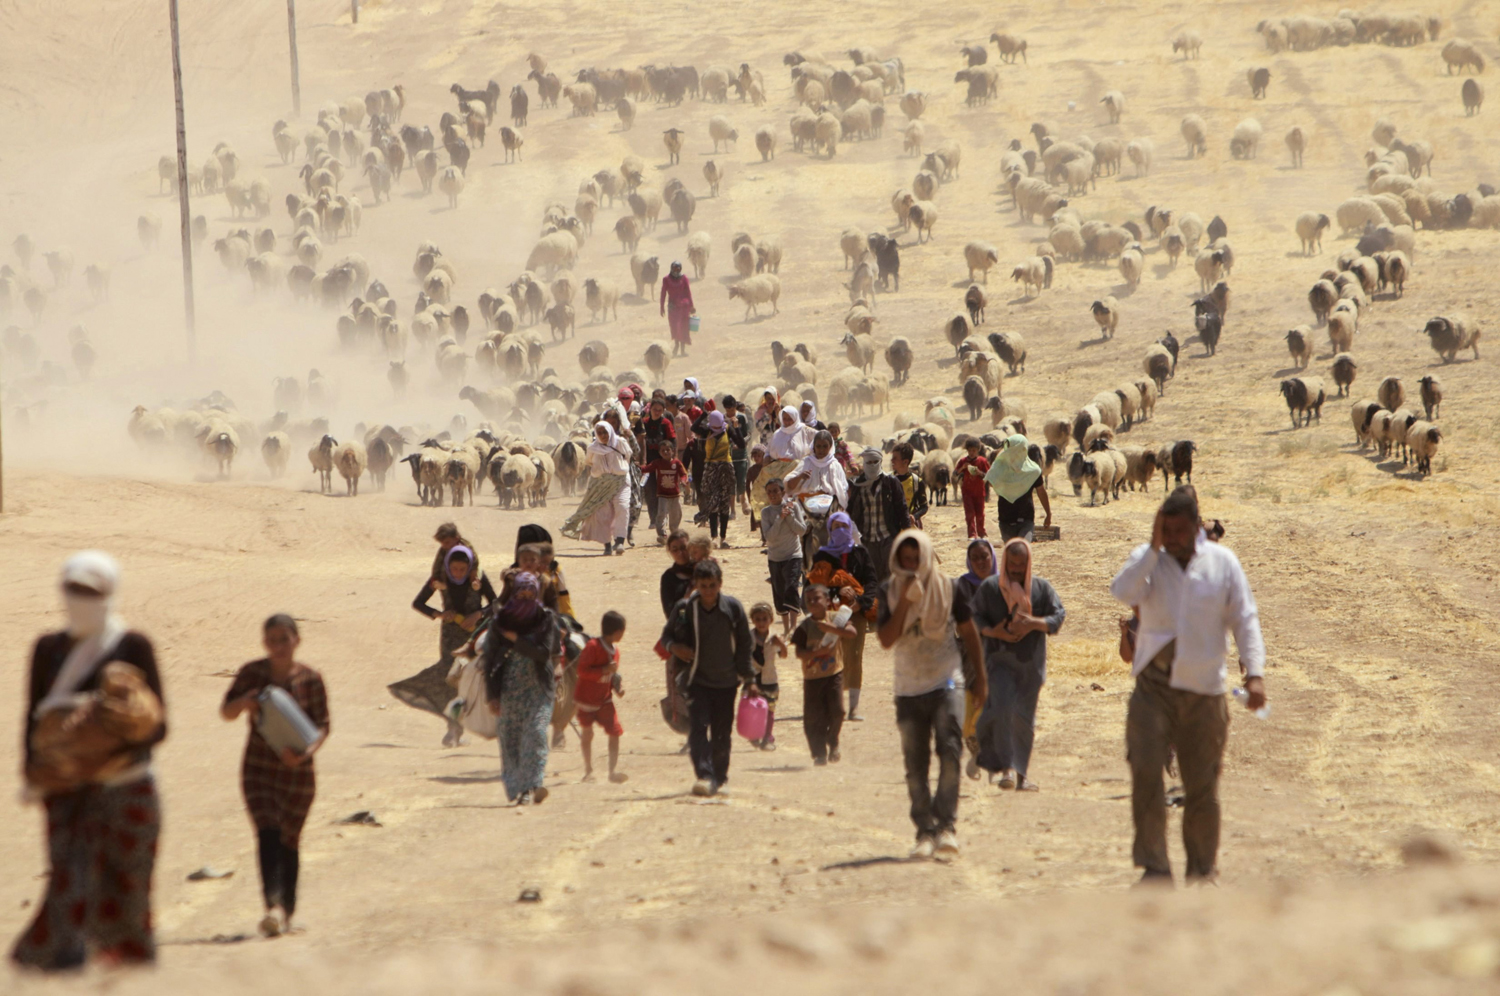 Aug. 10, 2014. Displaced people from the minority Yezidi sect, fleeing violence from forces loyal to the Islamic State in Sinjar town, walk towards the Syrian border, on the outskirts of Sinjar mountain, near the Syrian border town of Elierbeh of Al-Hasakah Governorate.